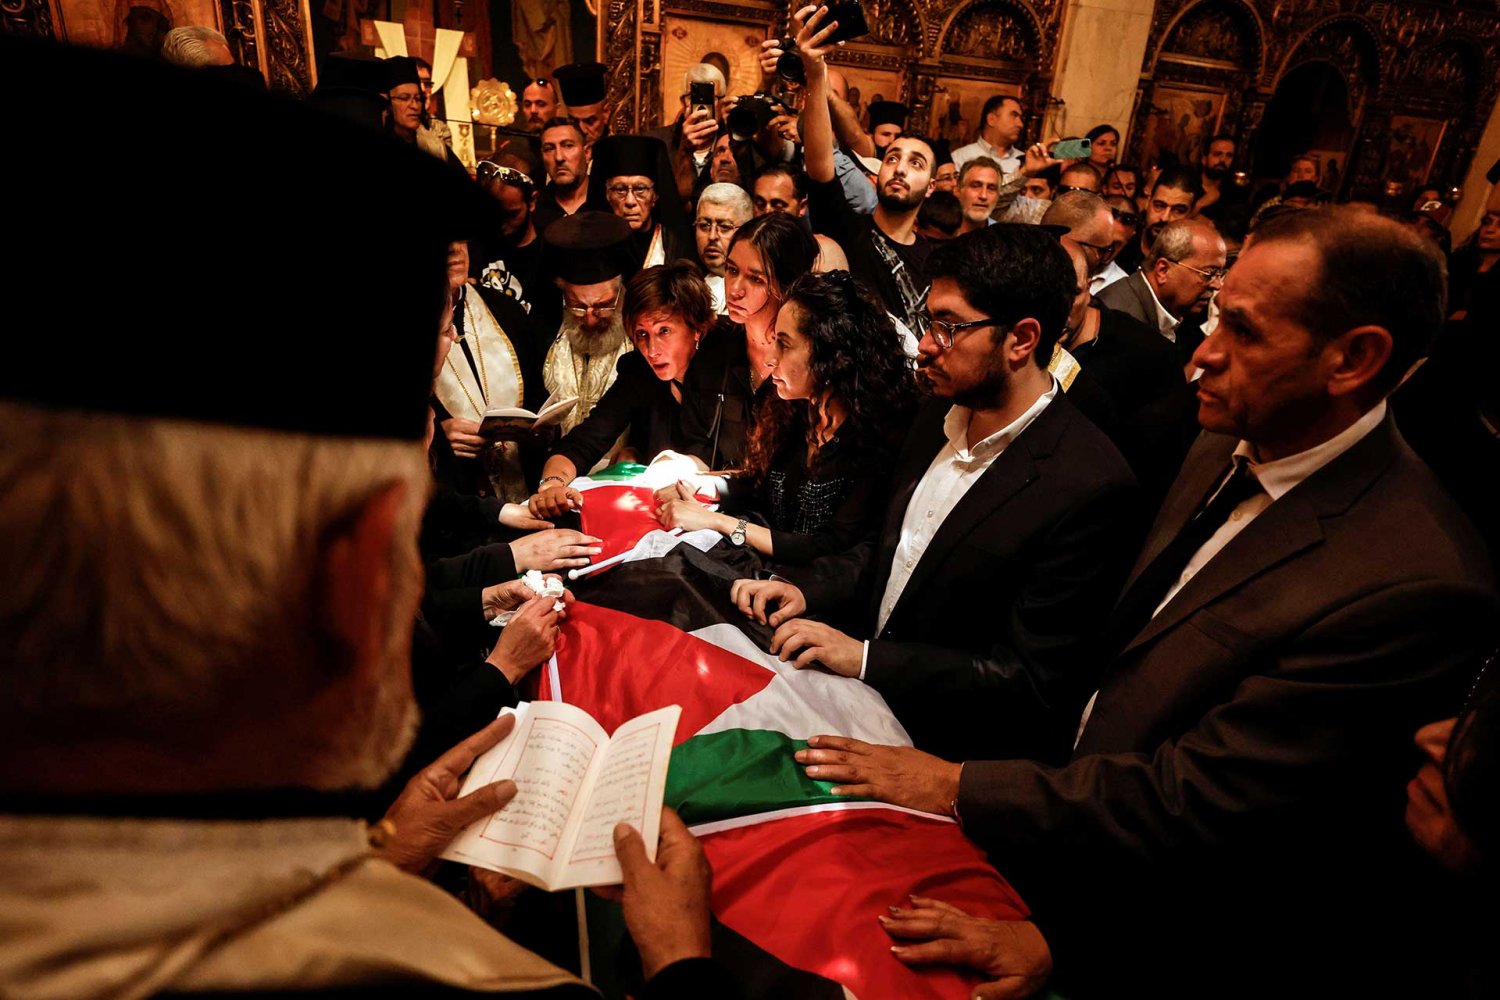 The funeral of Shireen Abu Akleh in the Melkite Greek Catholic Patriarchate (Church of the Annunciation) in the Old City of Jerusalem